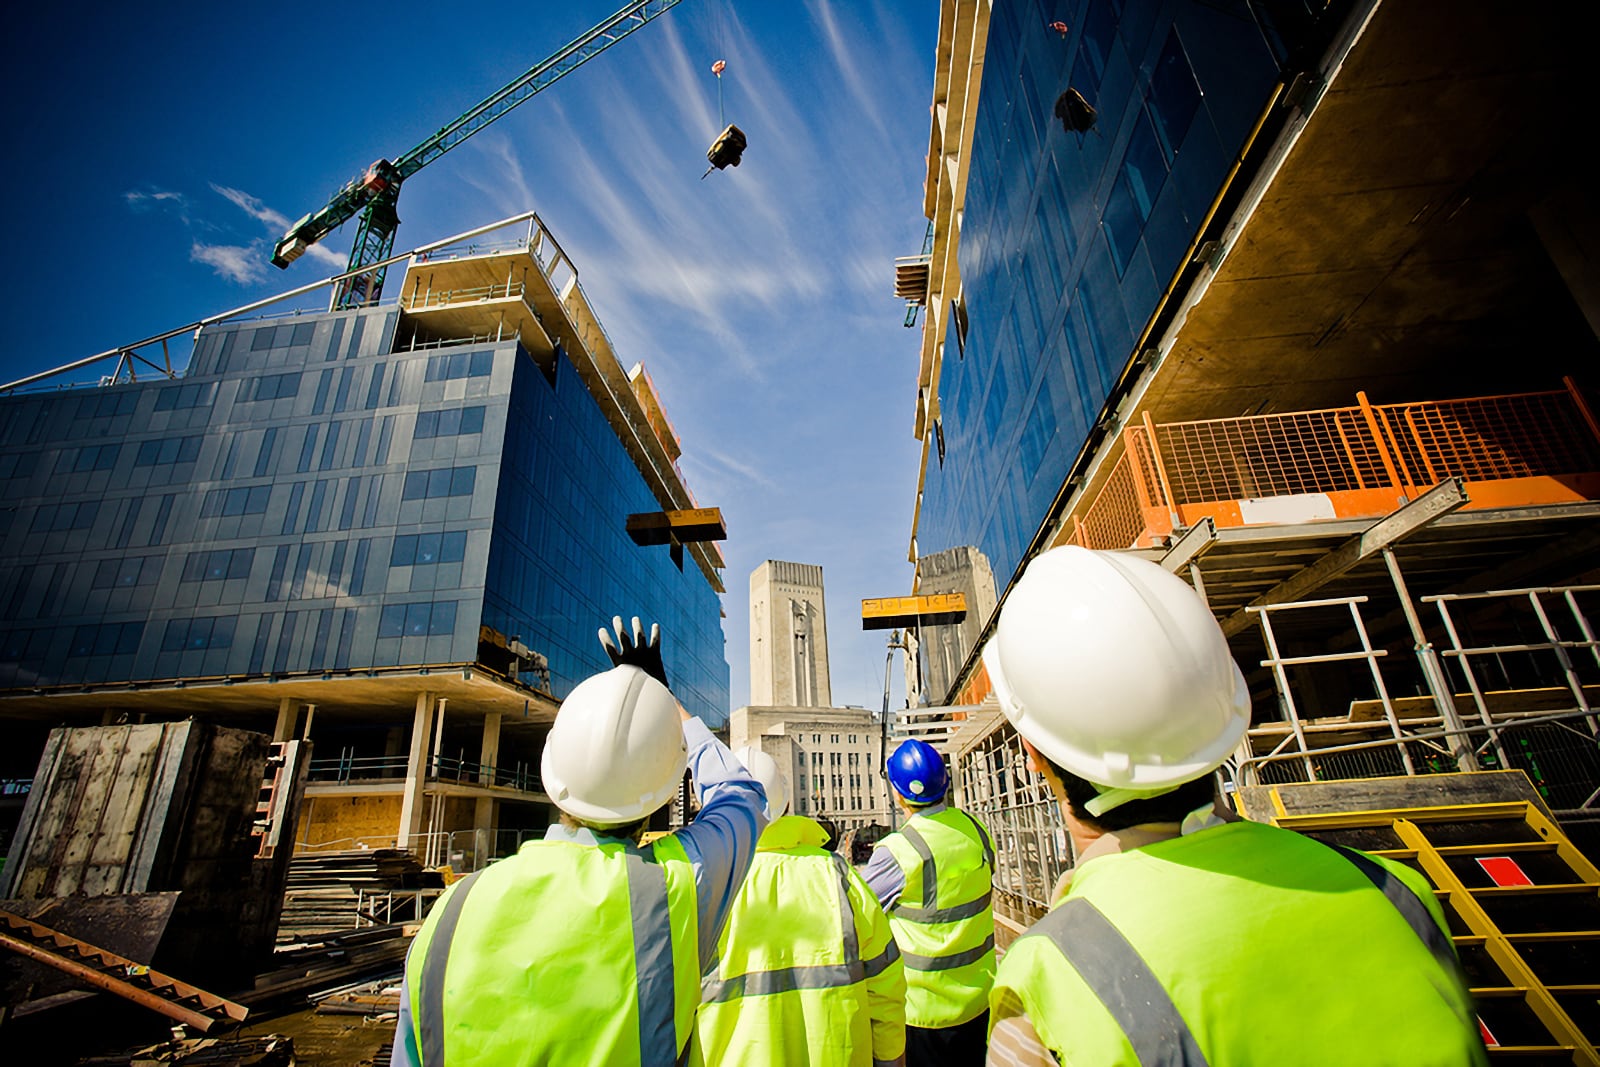 Moving Goods Safely On Building Sites